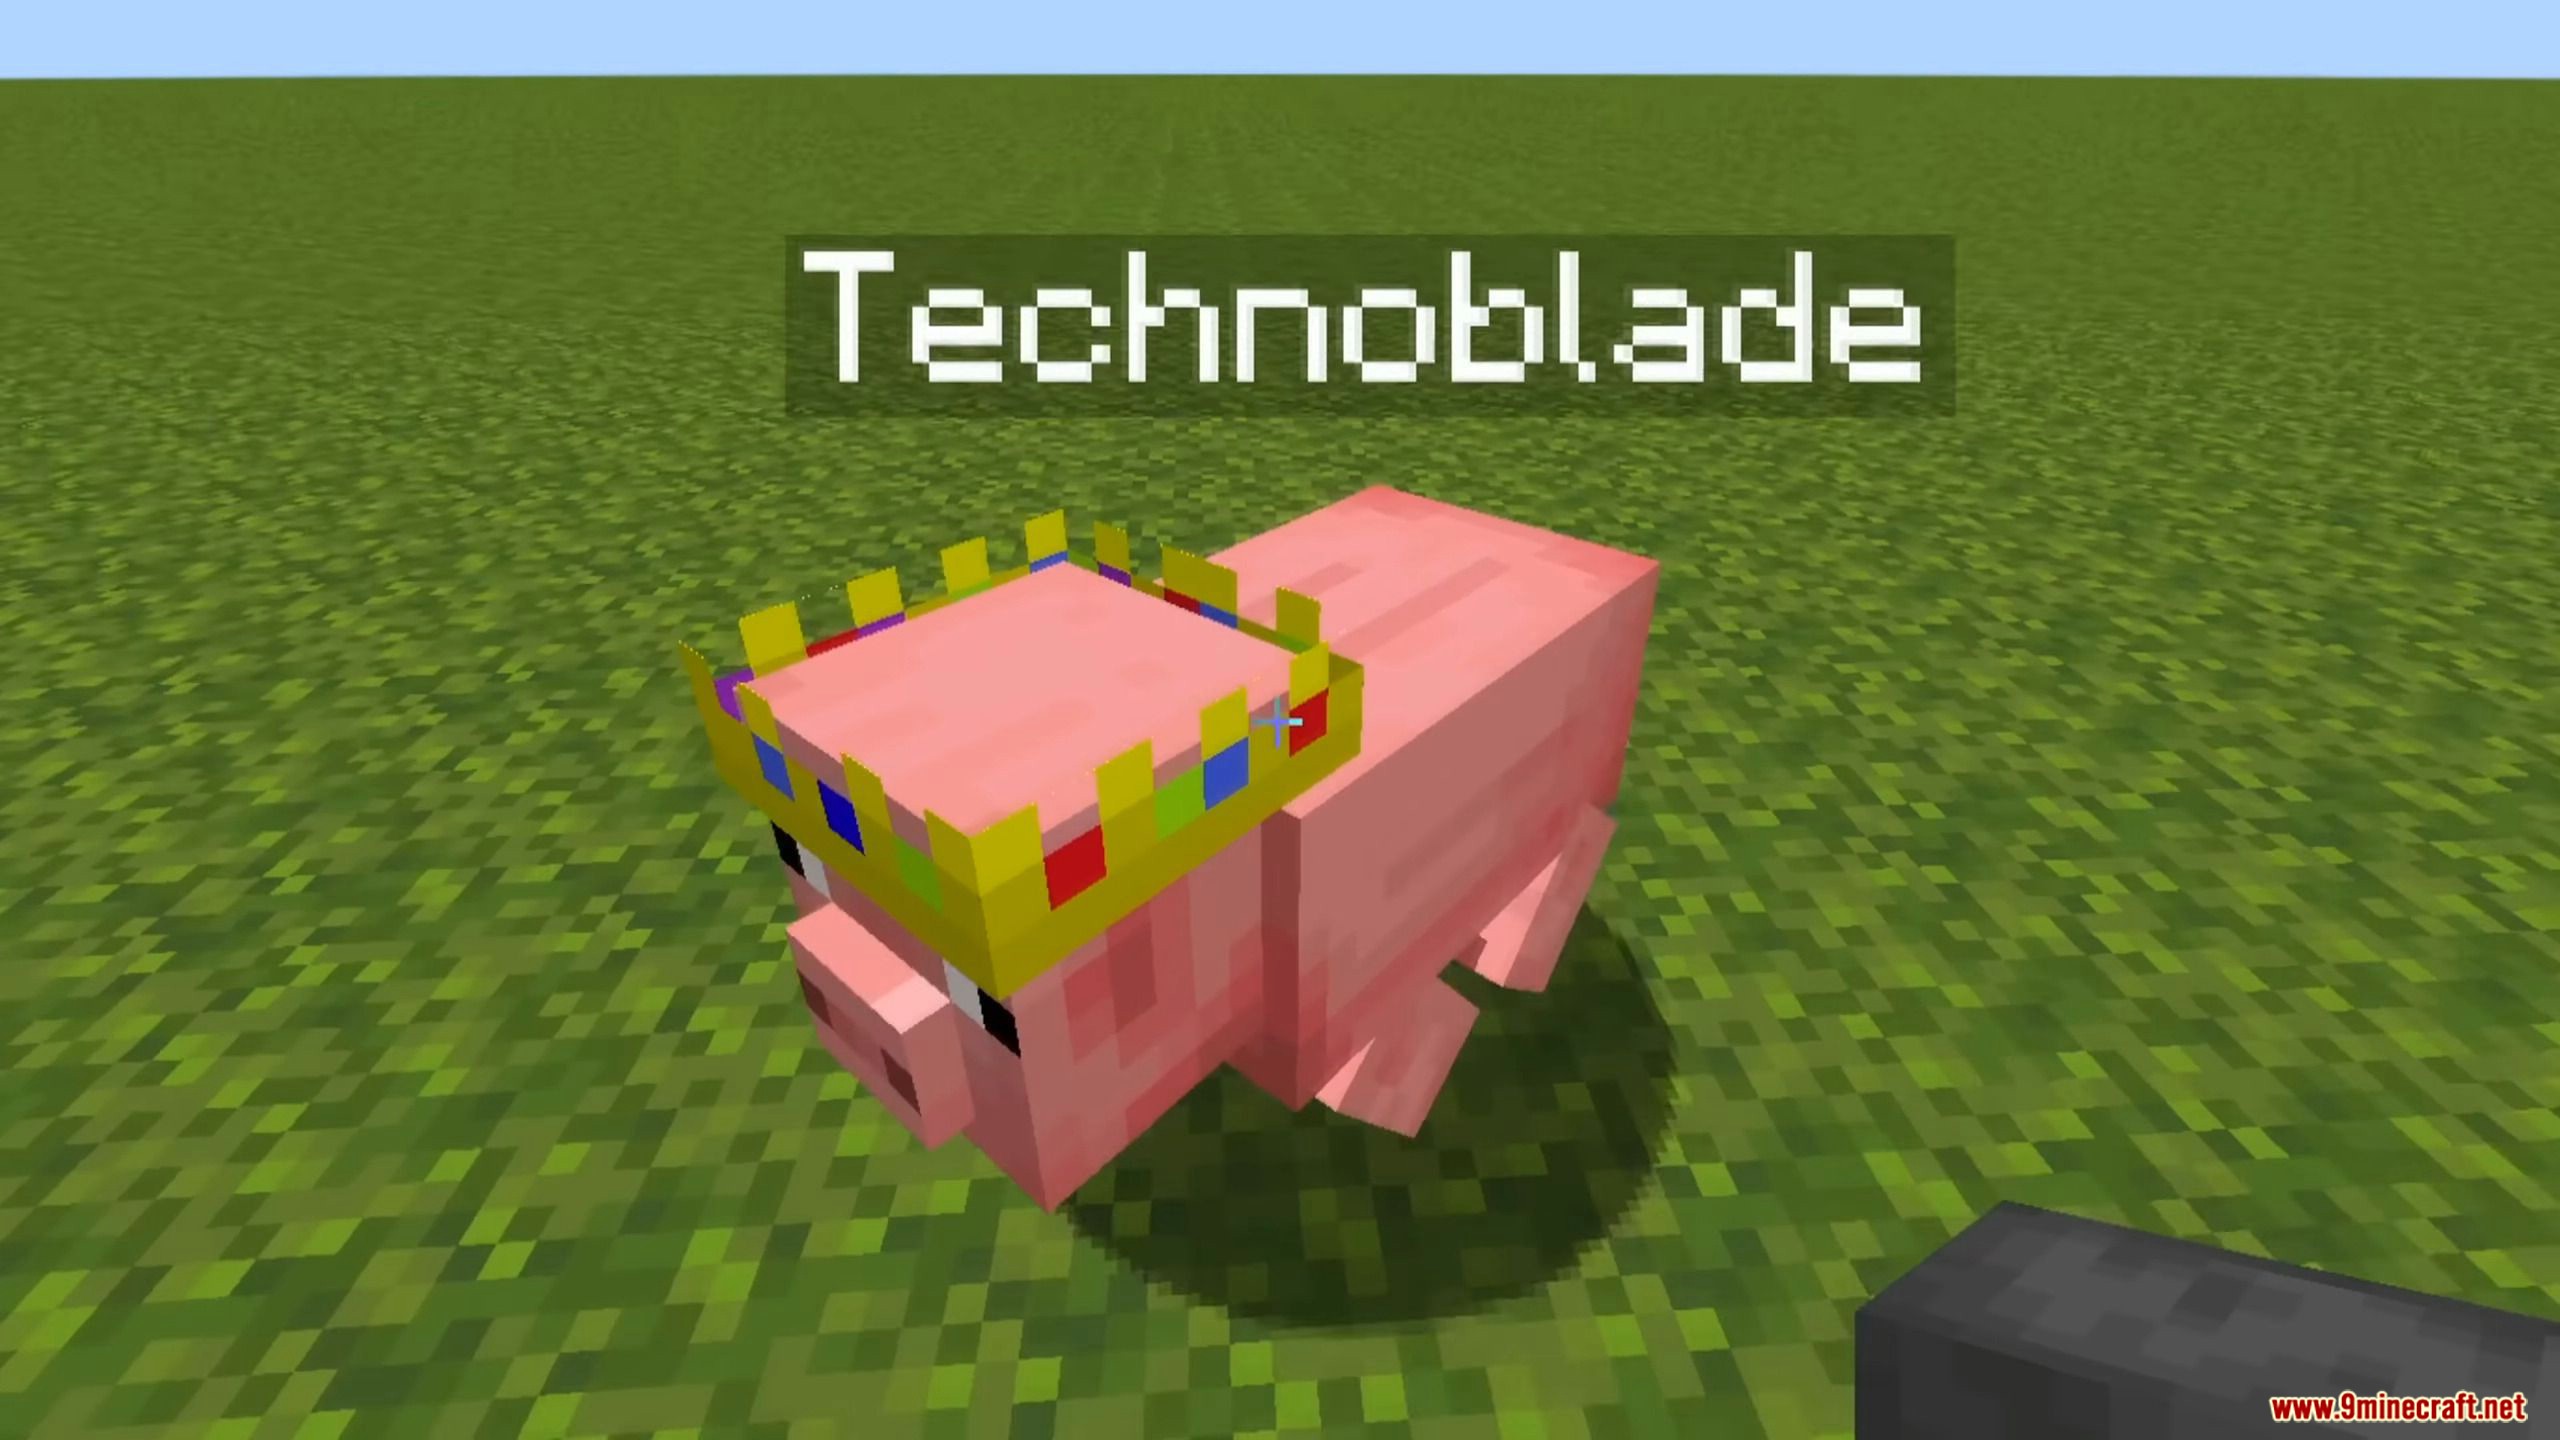 Technoblade's Minecraft skin, real name, texture pack, and more